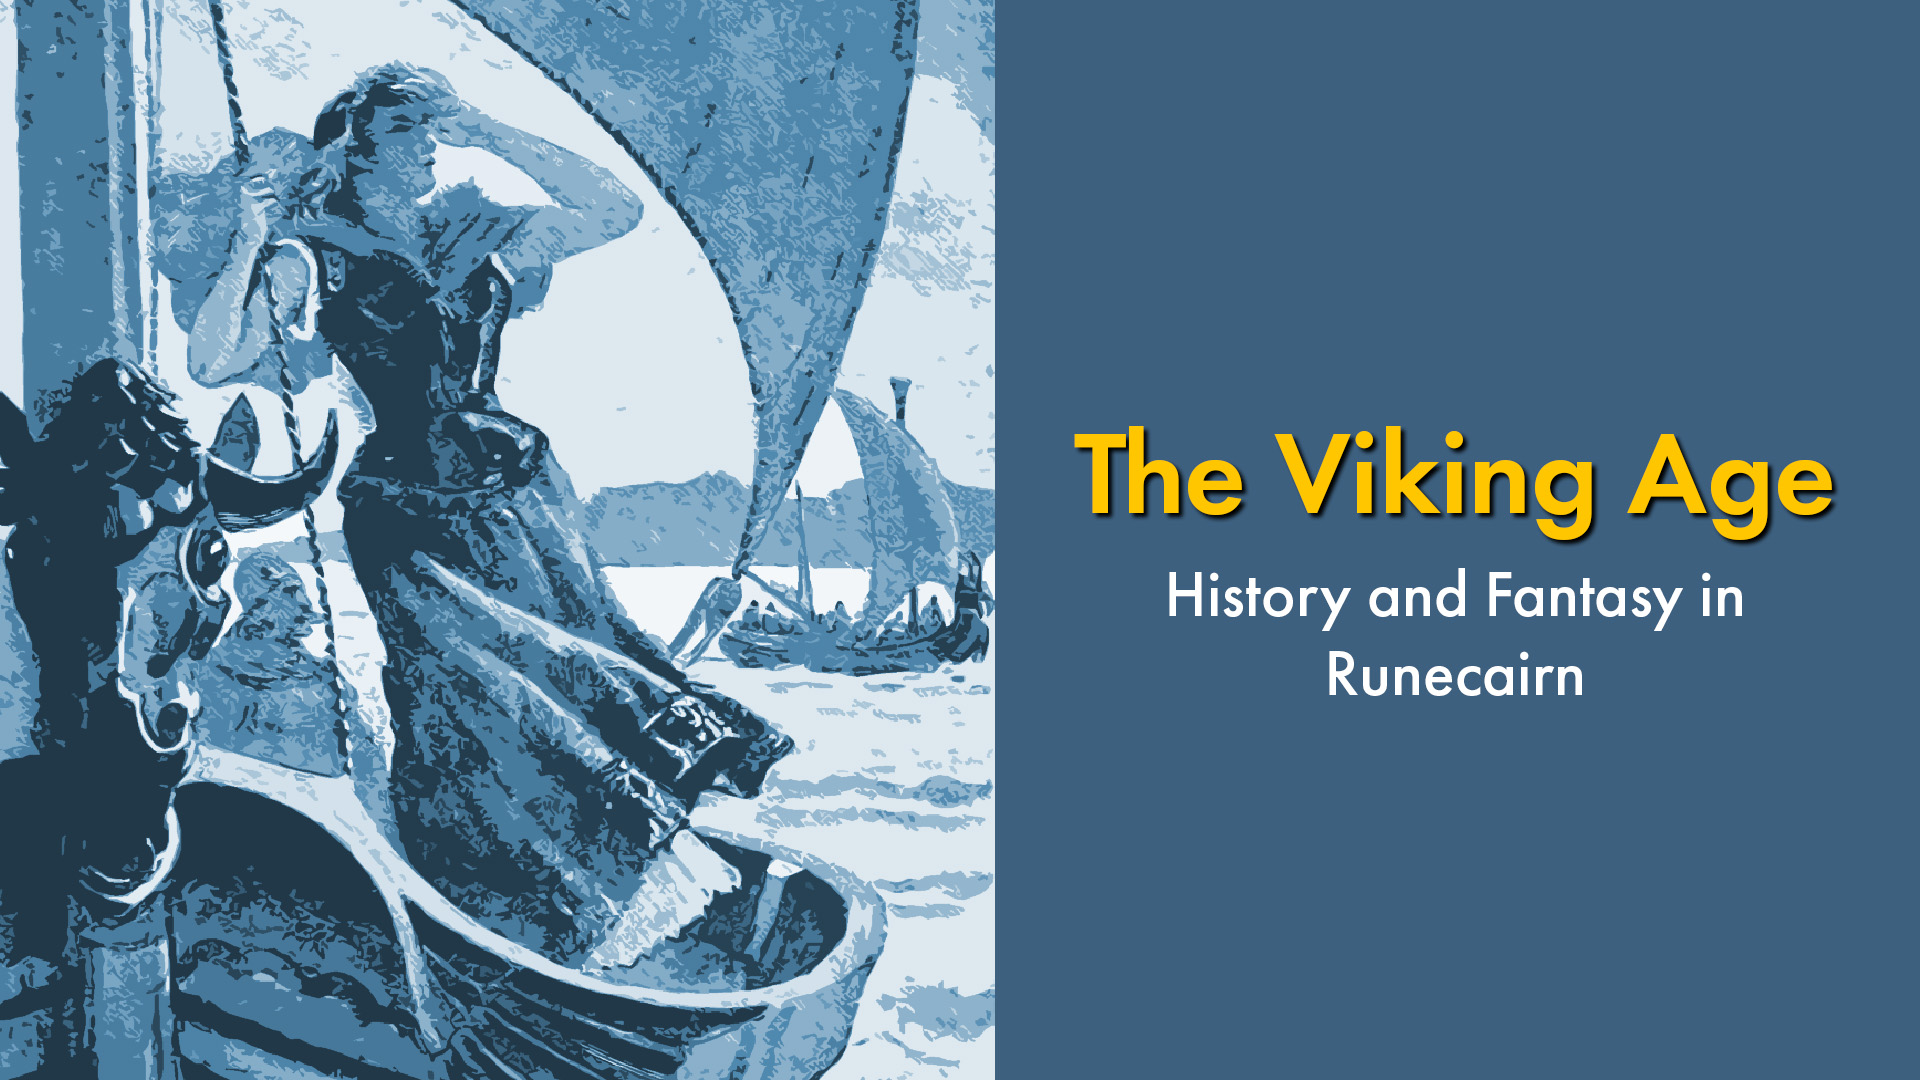 The Viking Age: History and Fantasy in Runecairn